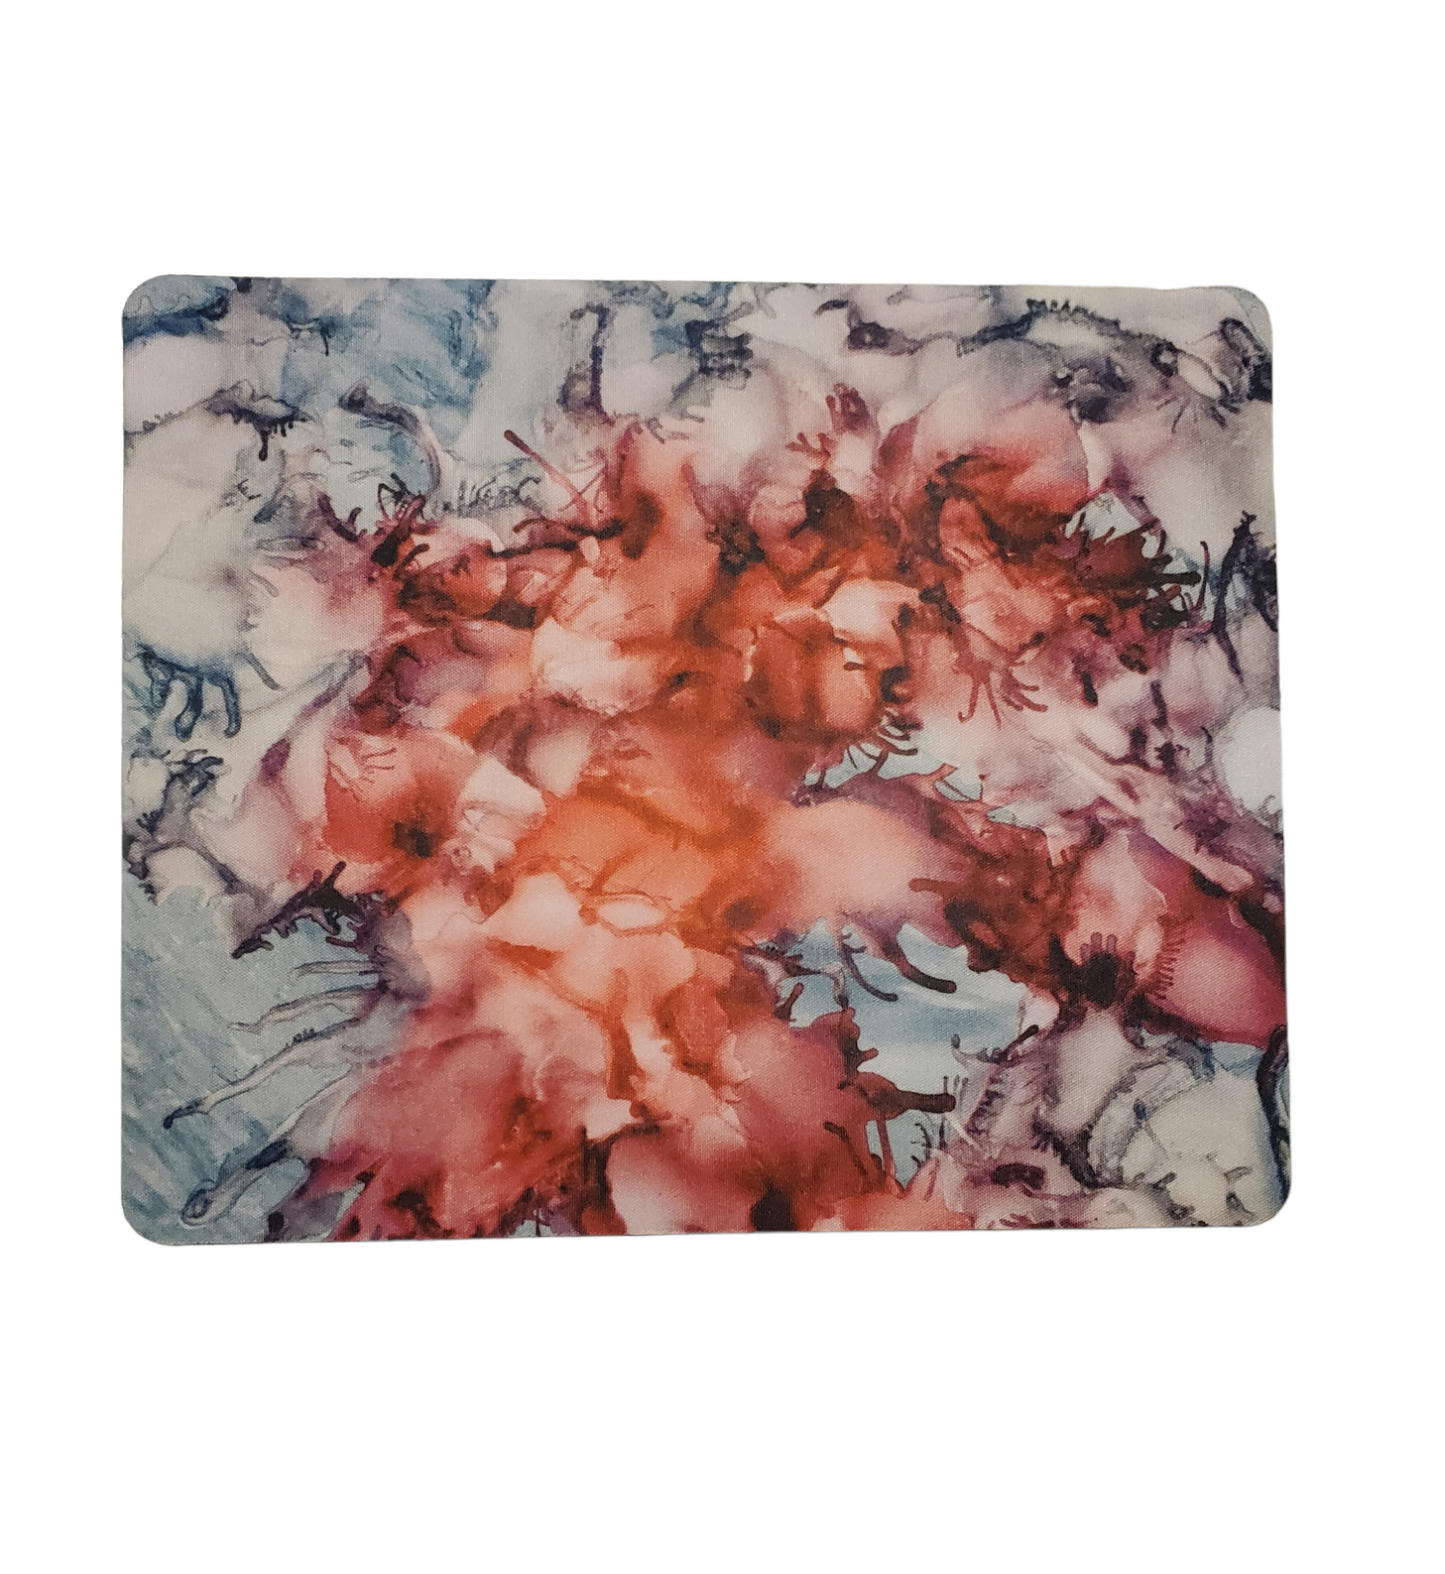 Unique Alcohol Ink Decorated Mouse Pads for Home or Office